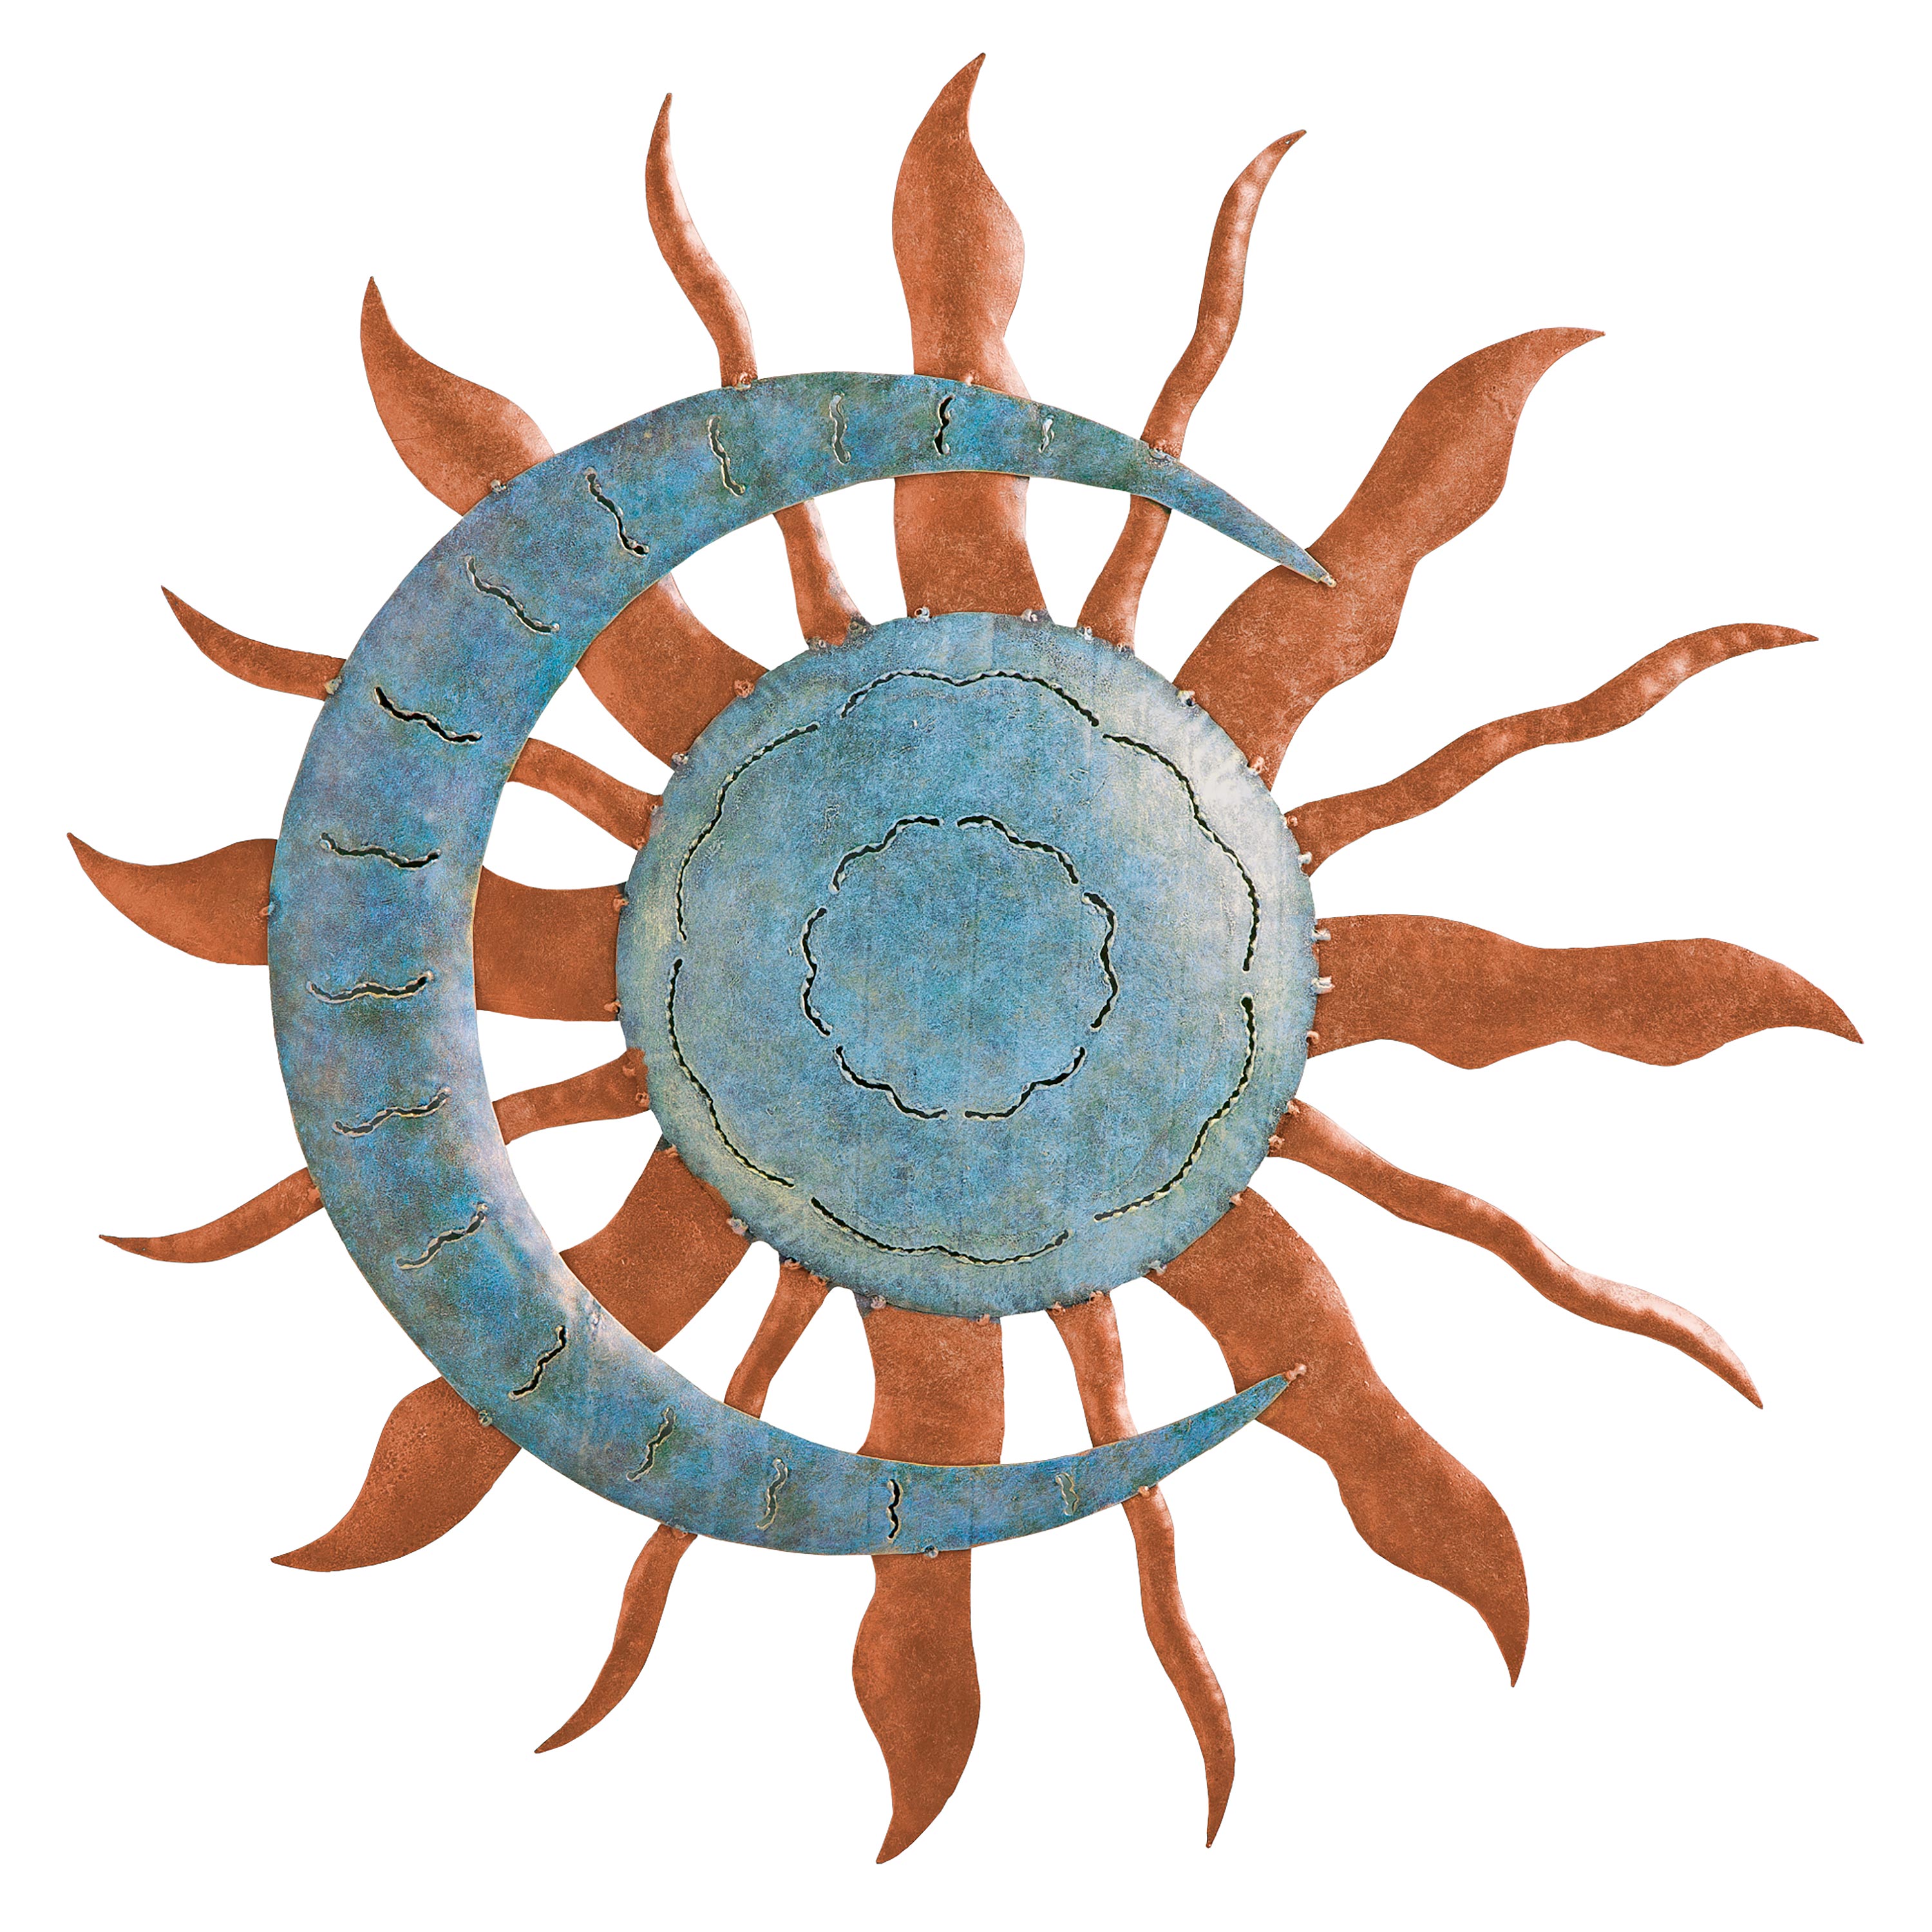 Handcrafted Blue and Copper-Colored Recycled Metal Moon and Sun Wall Art